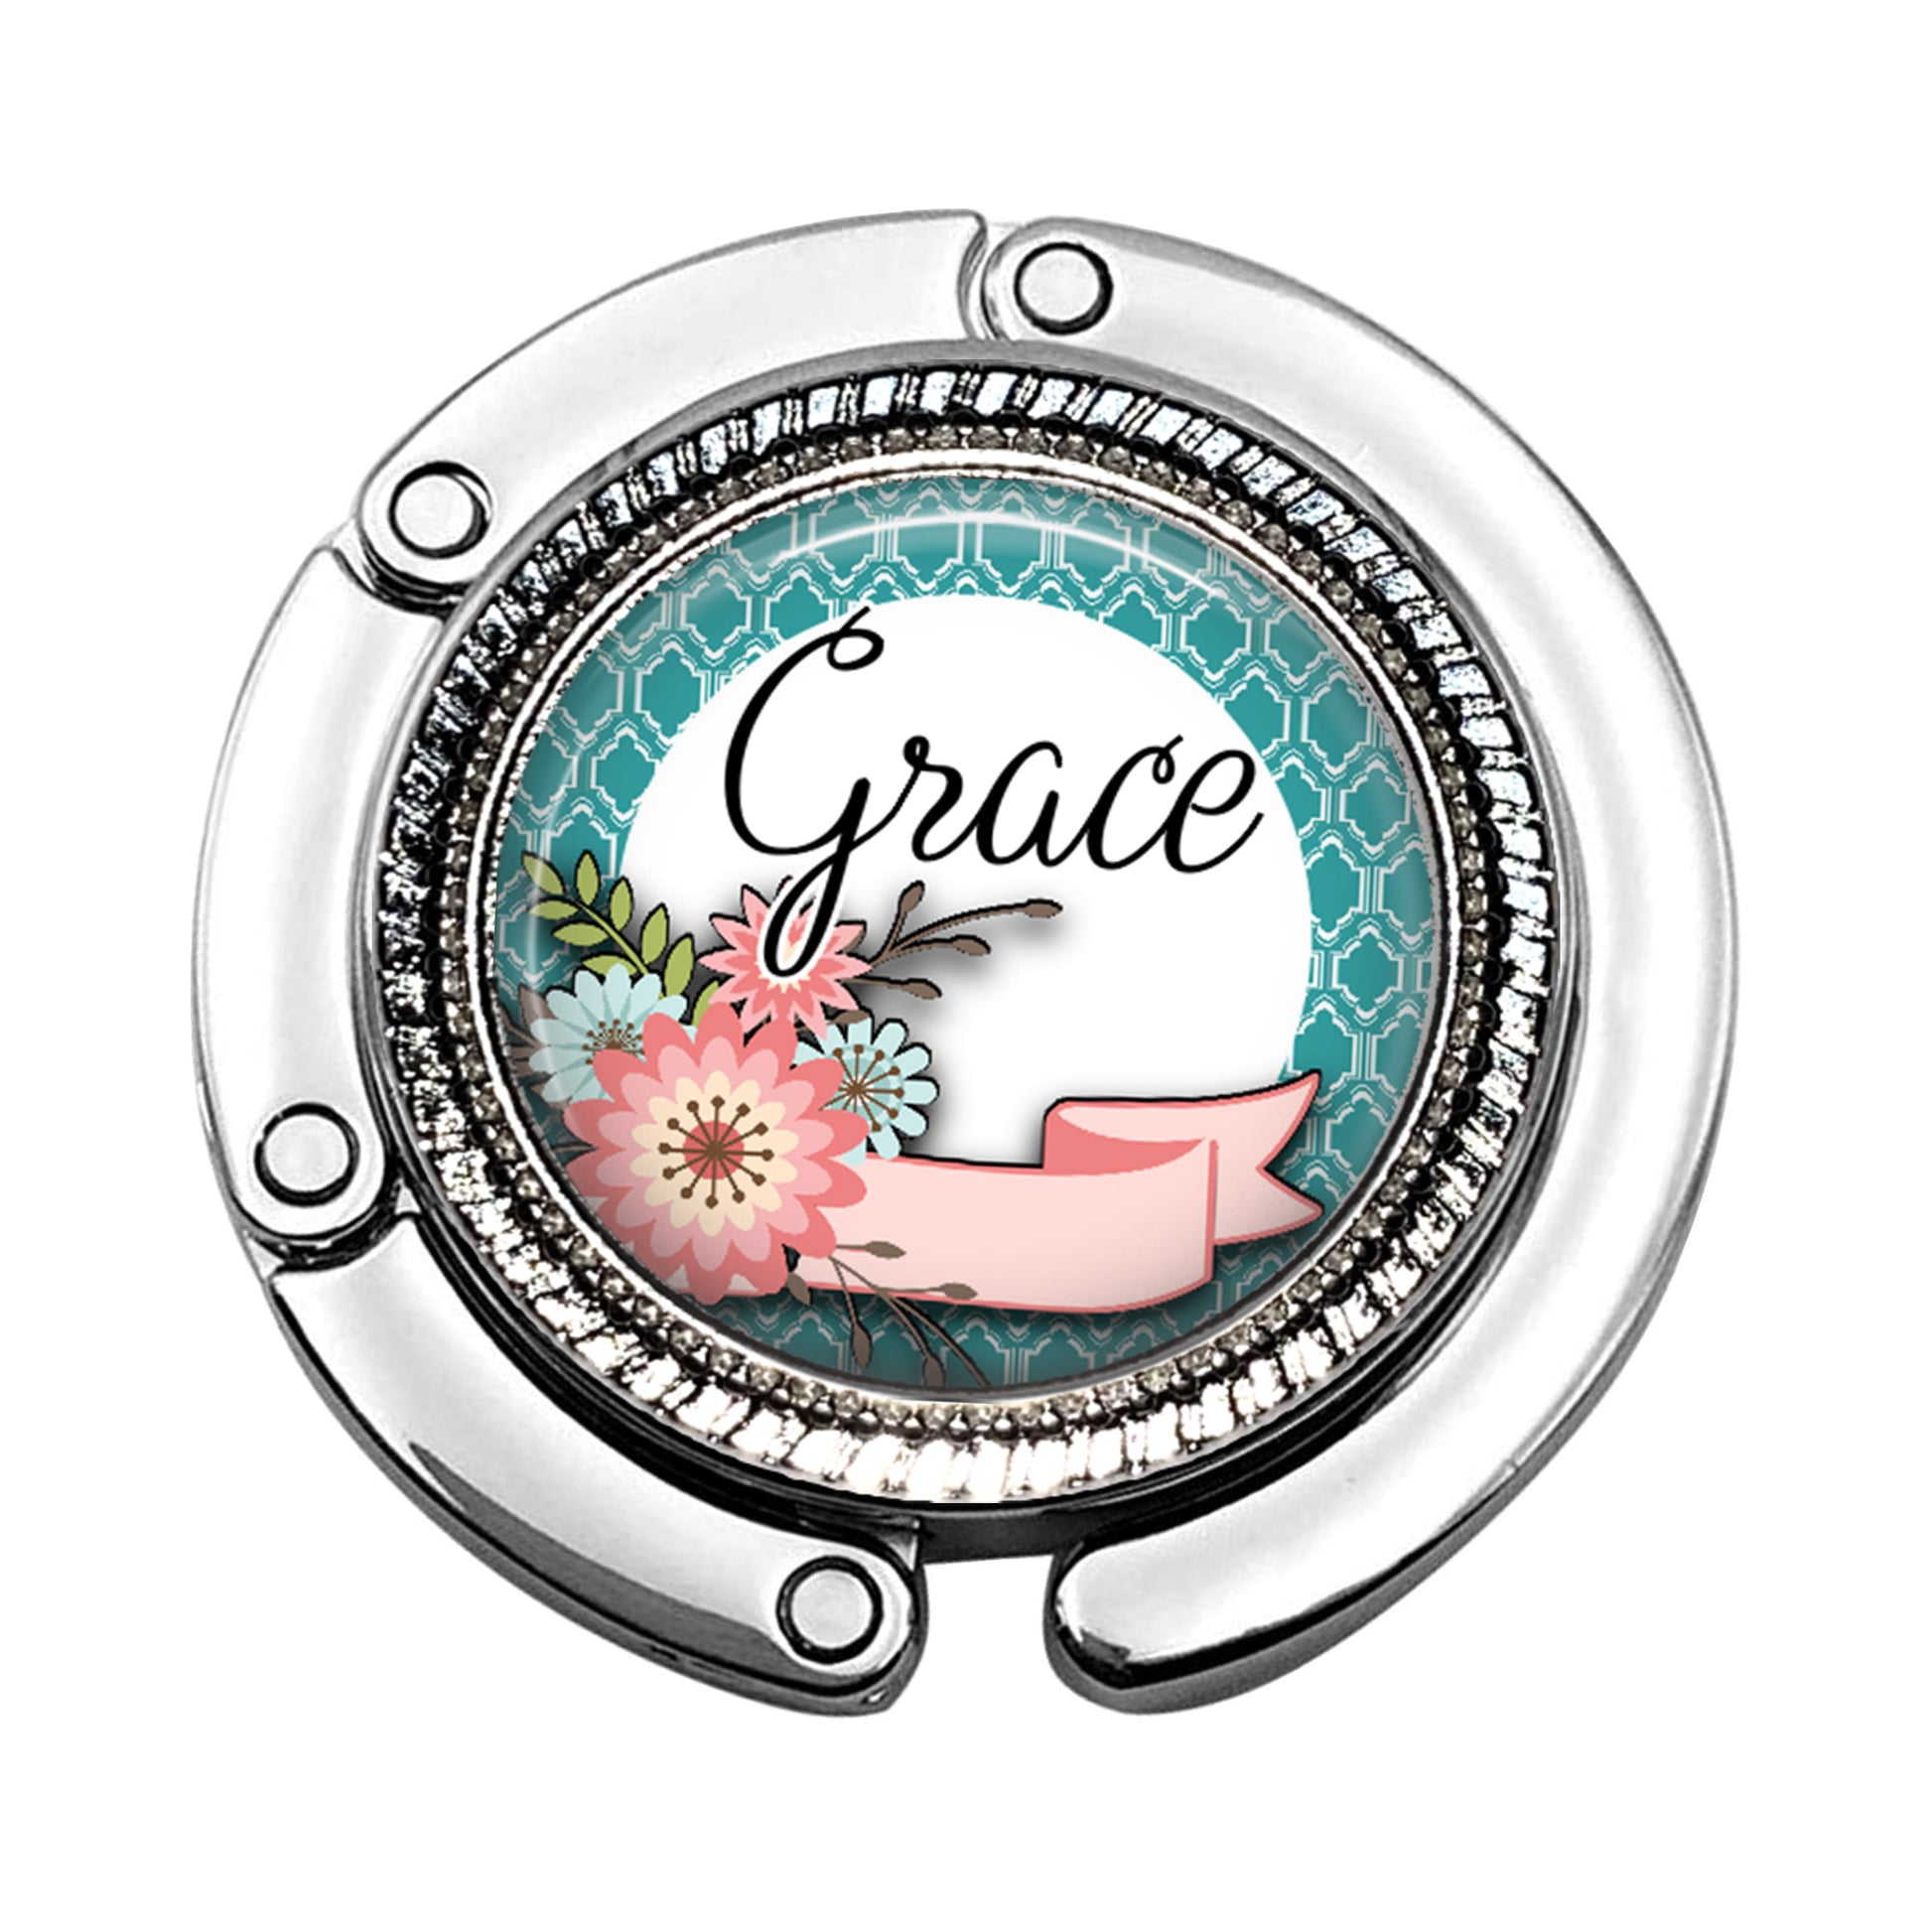 a picture of a badge with the word grace on it